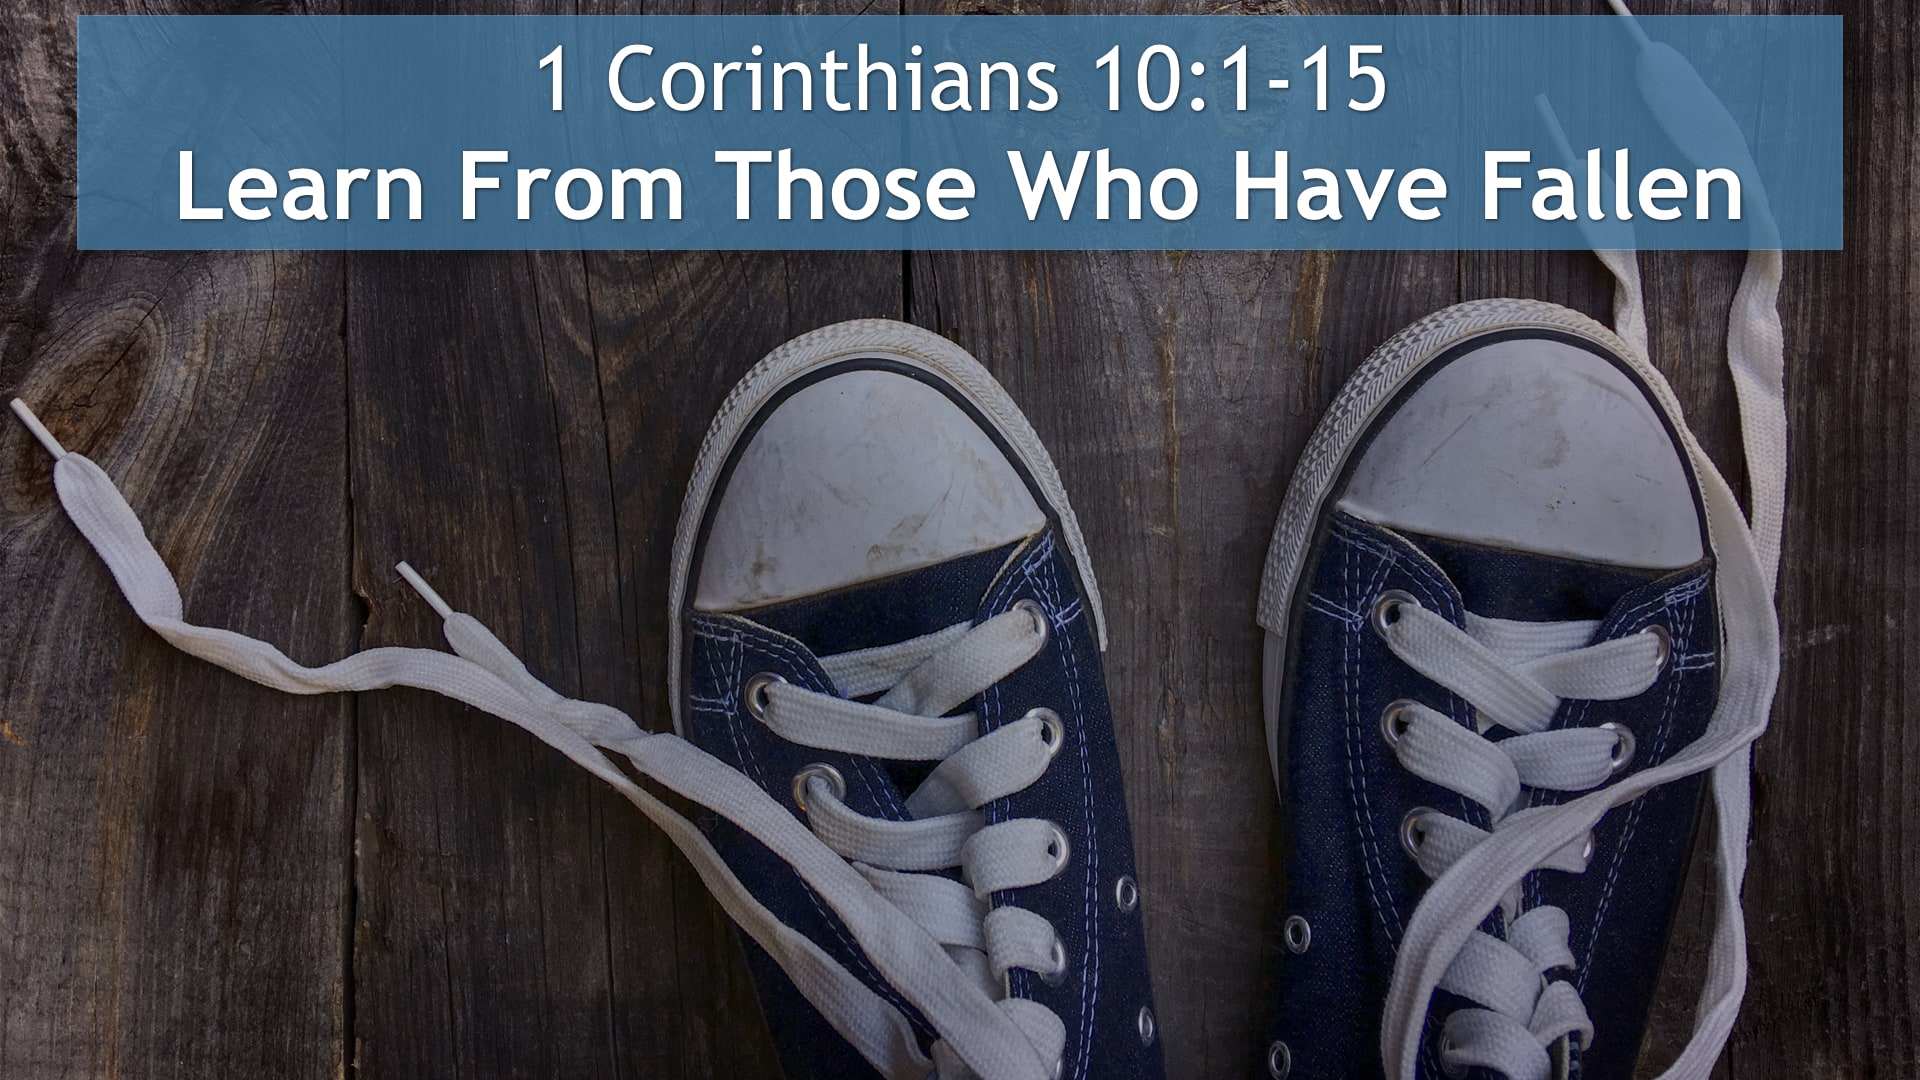 Jerry Simmons teaching 1 Corinthians 10:1-15, Learn From Those Who Have Fallen